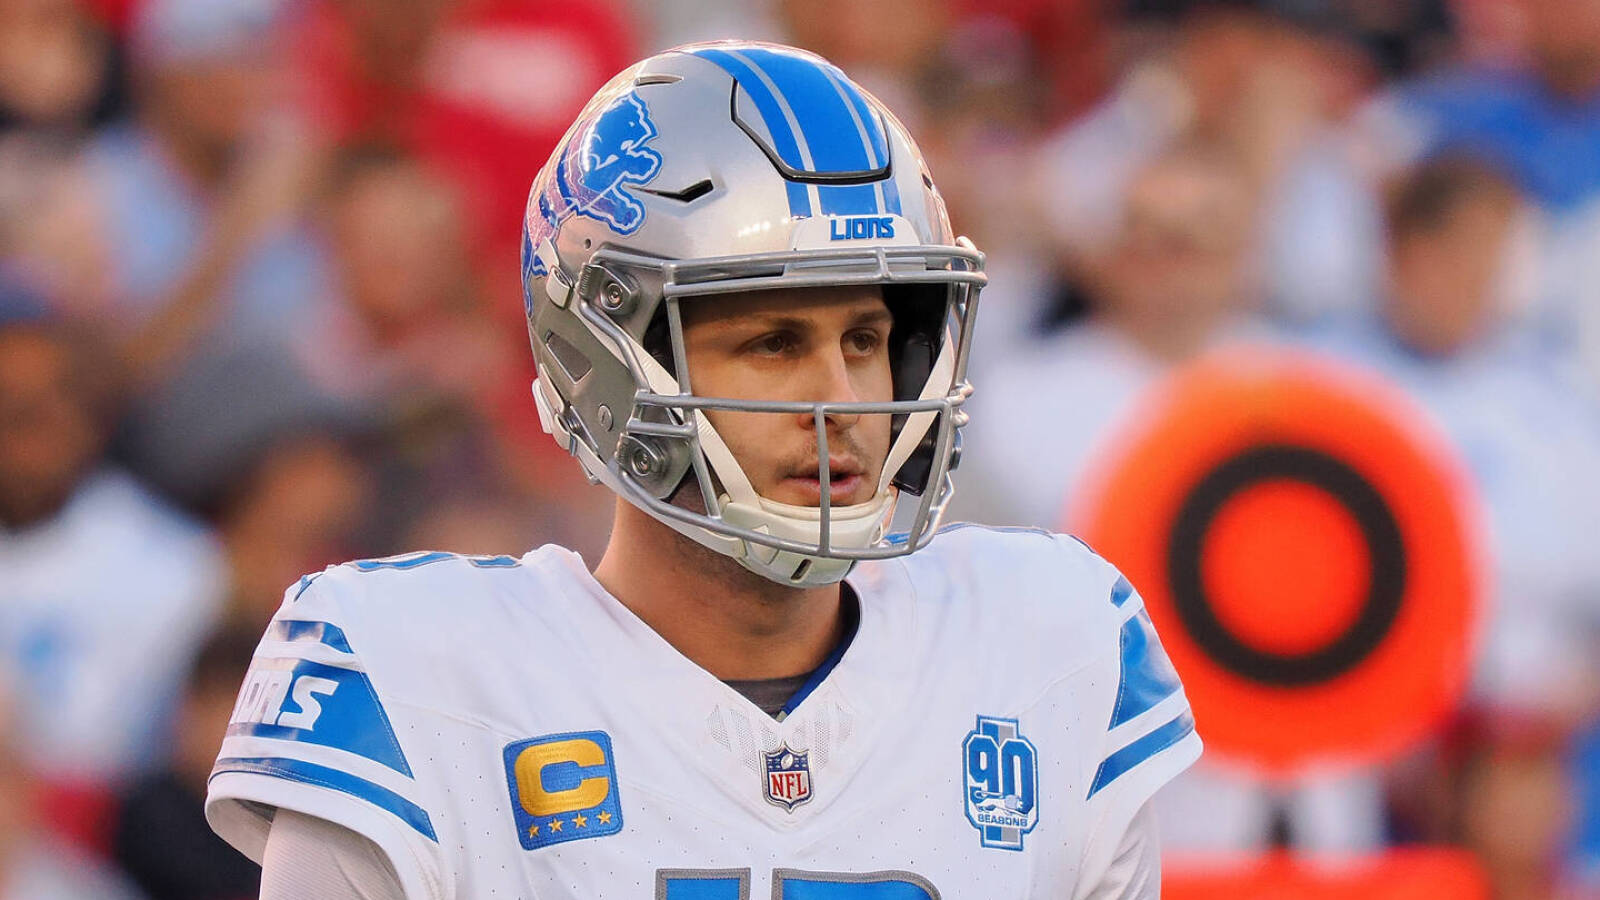 Jared Goff reflects on Lions' struggles, recent successes